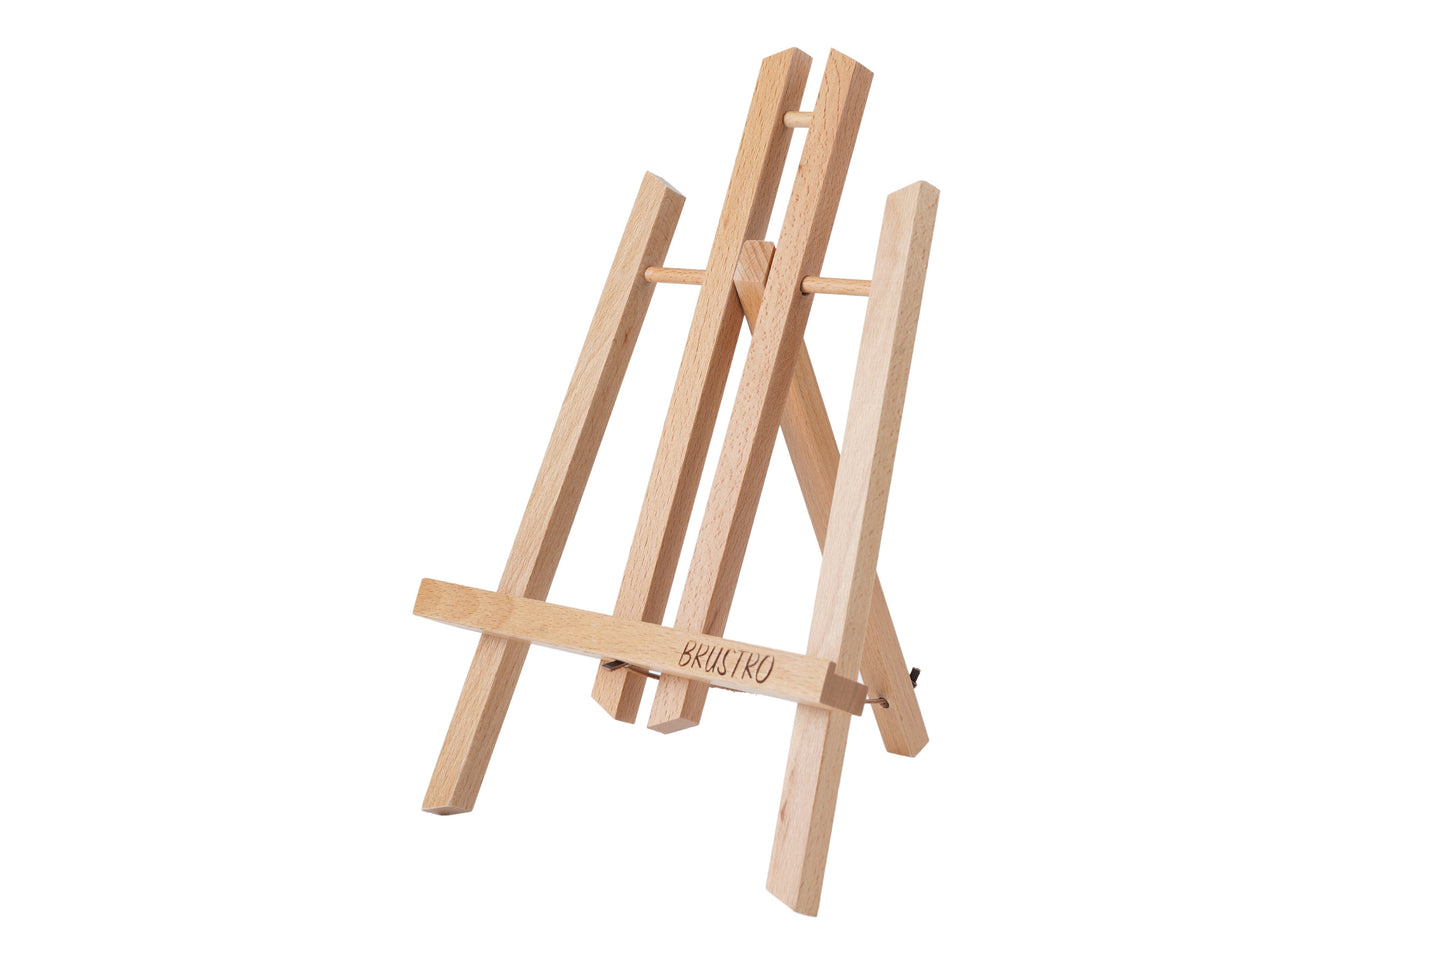 Brustro Artists' Tabletop A-Frame Wooden Easel 12inch